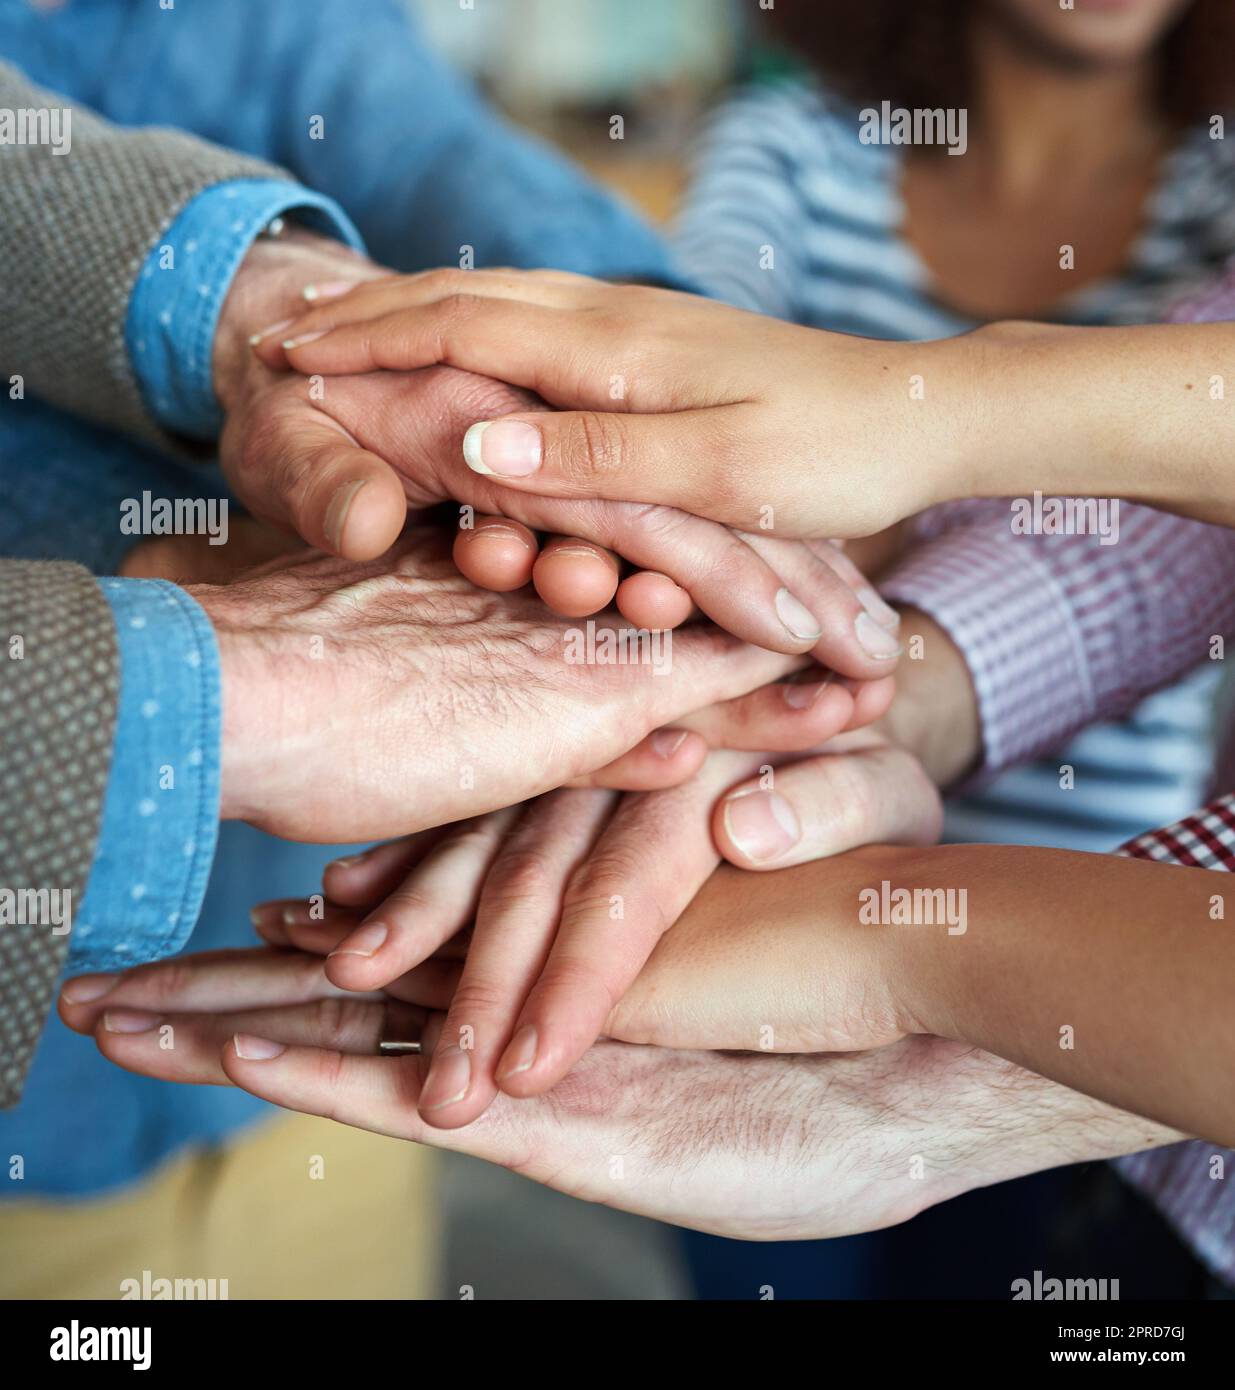 Hands stacked and piled to show team unity, strength or motivation among business men, women or office colleagues. Closeup of huddled group of casual businesspeople showing support, trust or teamwork Stock Photo